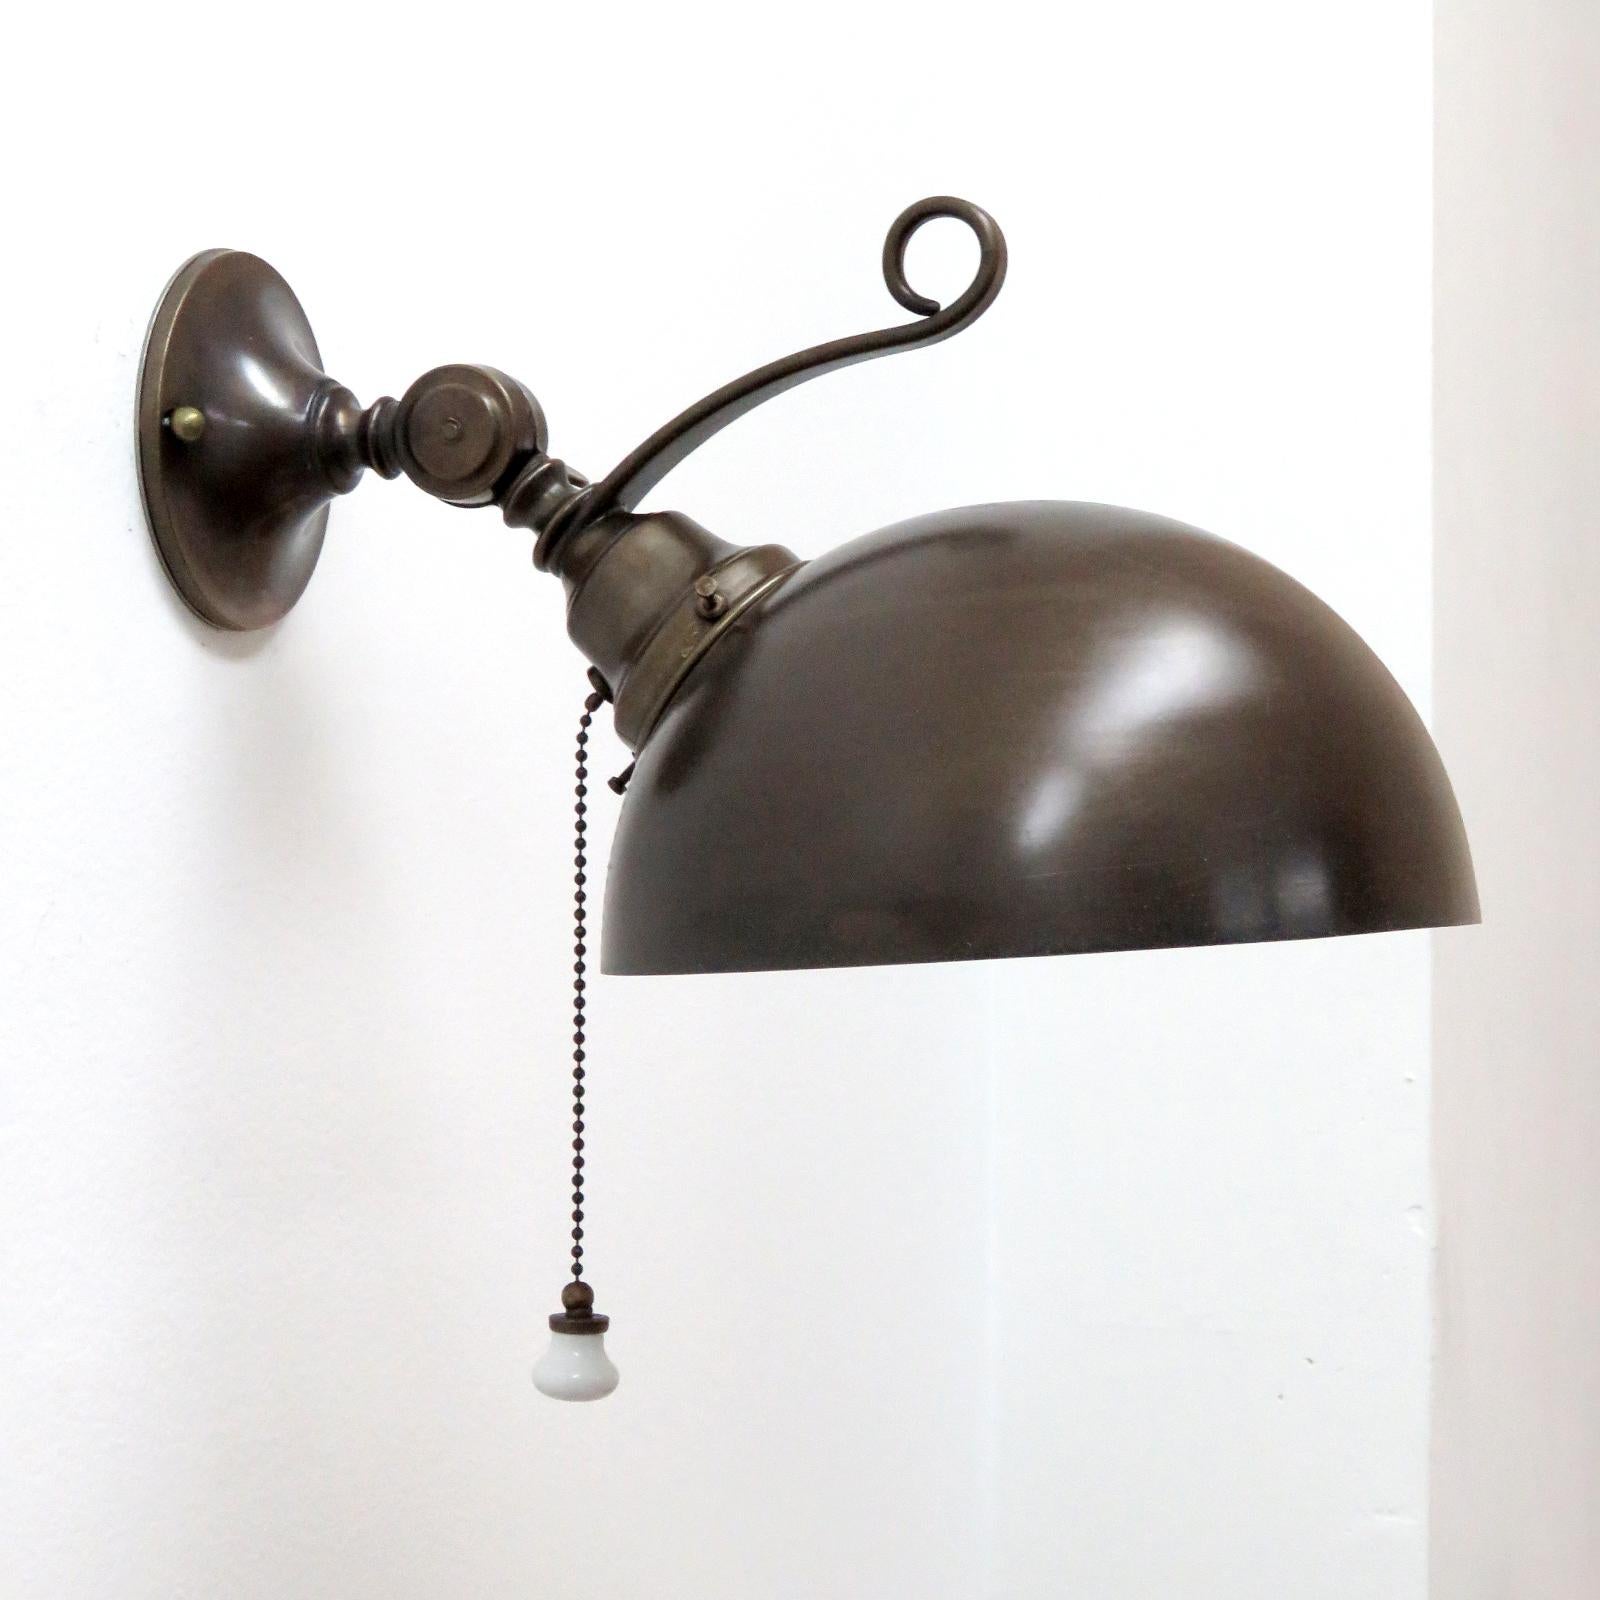 Wonderful Italian patinaed brass sconces, adjustable dome shade with cream colored interior and individual ceramic pull switch wired for US standards, one E27 socket each, max. wattage 75w per fixture, bulb provided as a one time courtesy. Priced